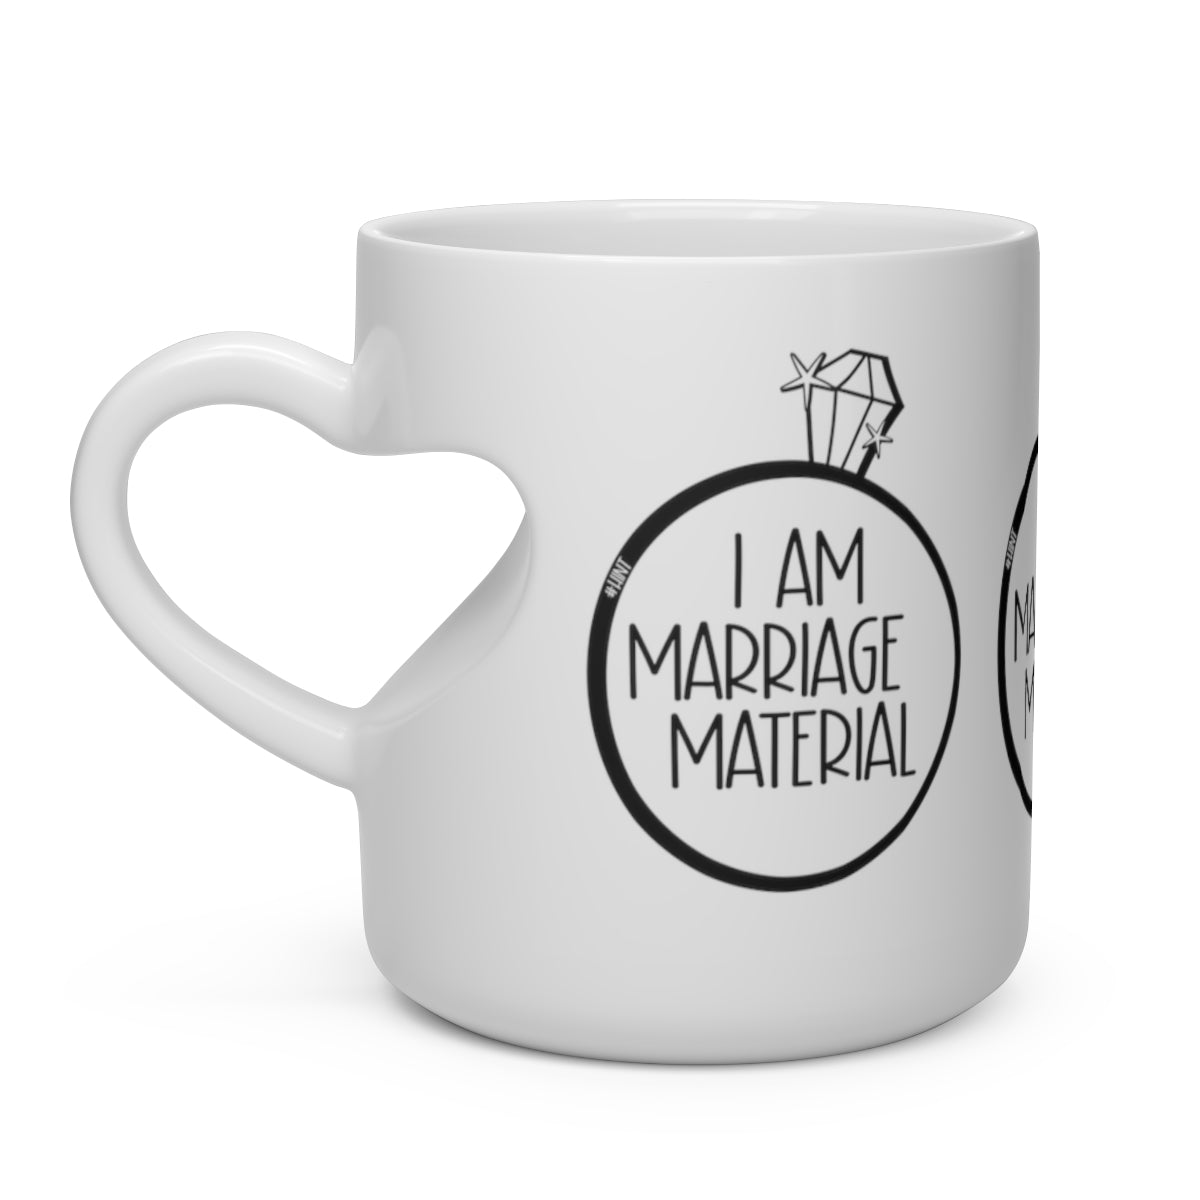 #WEIRDO | Funny short jokes like I AM MARRIAGE MATERIAL is printed 3 times on this white mug with heart shaped handle. For weird gifts to get your partner on one knee is found at hashtagweirdo.com